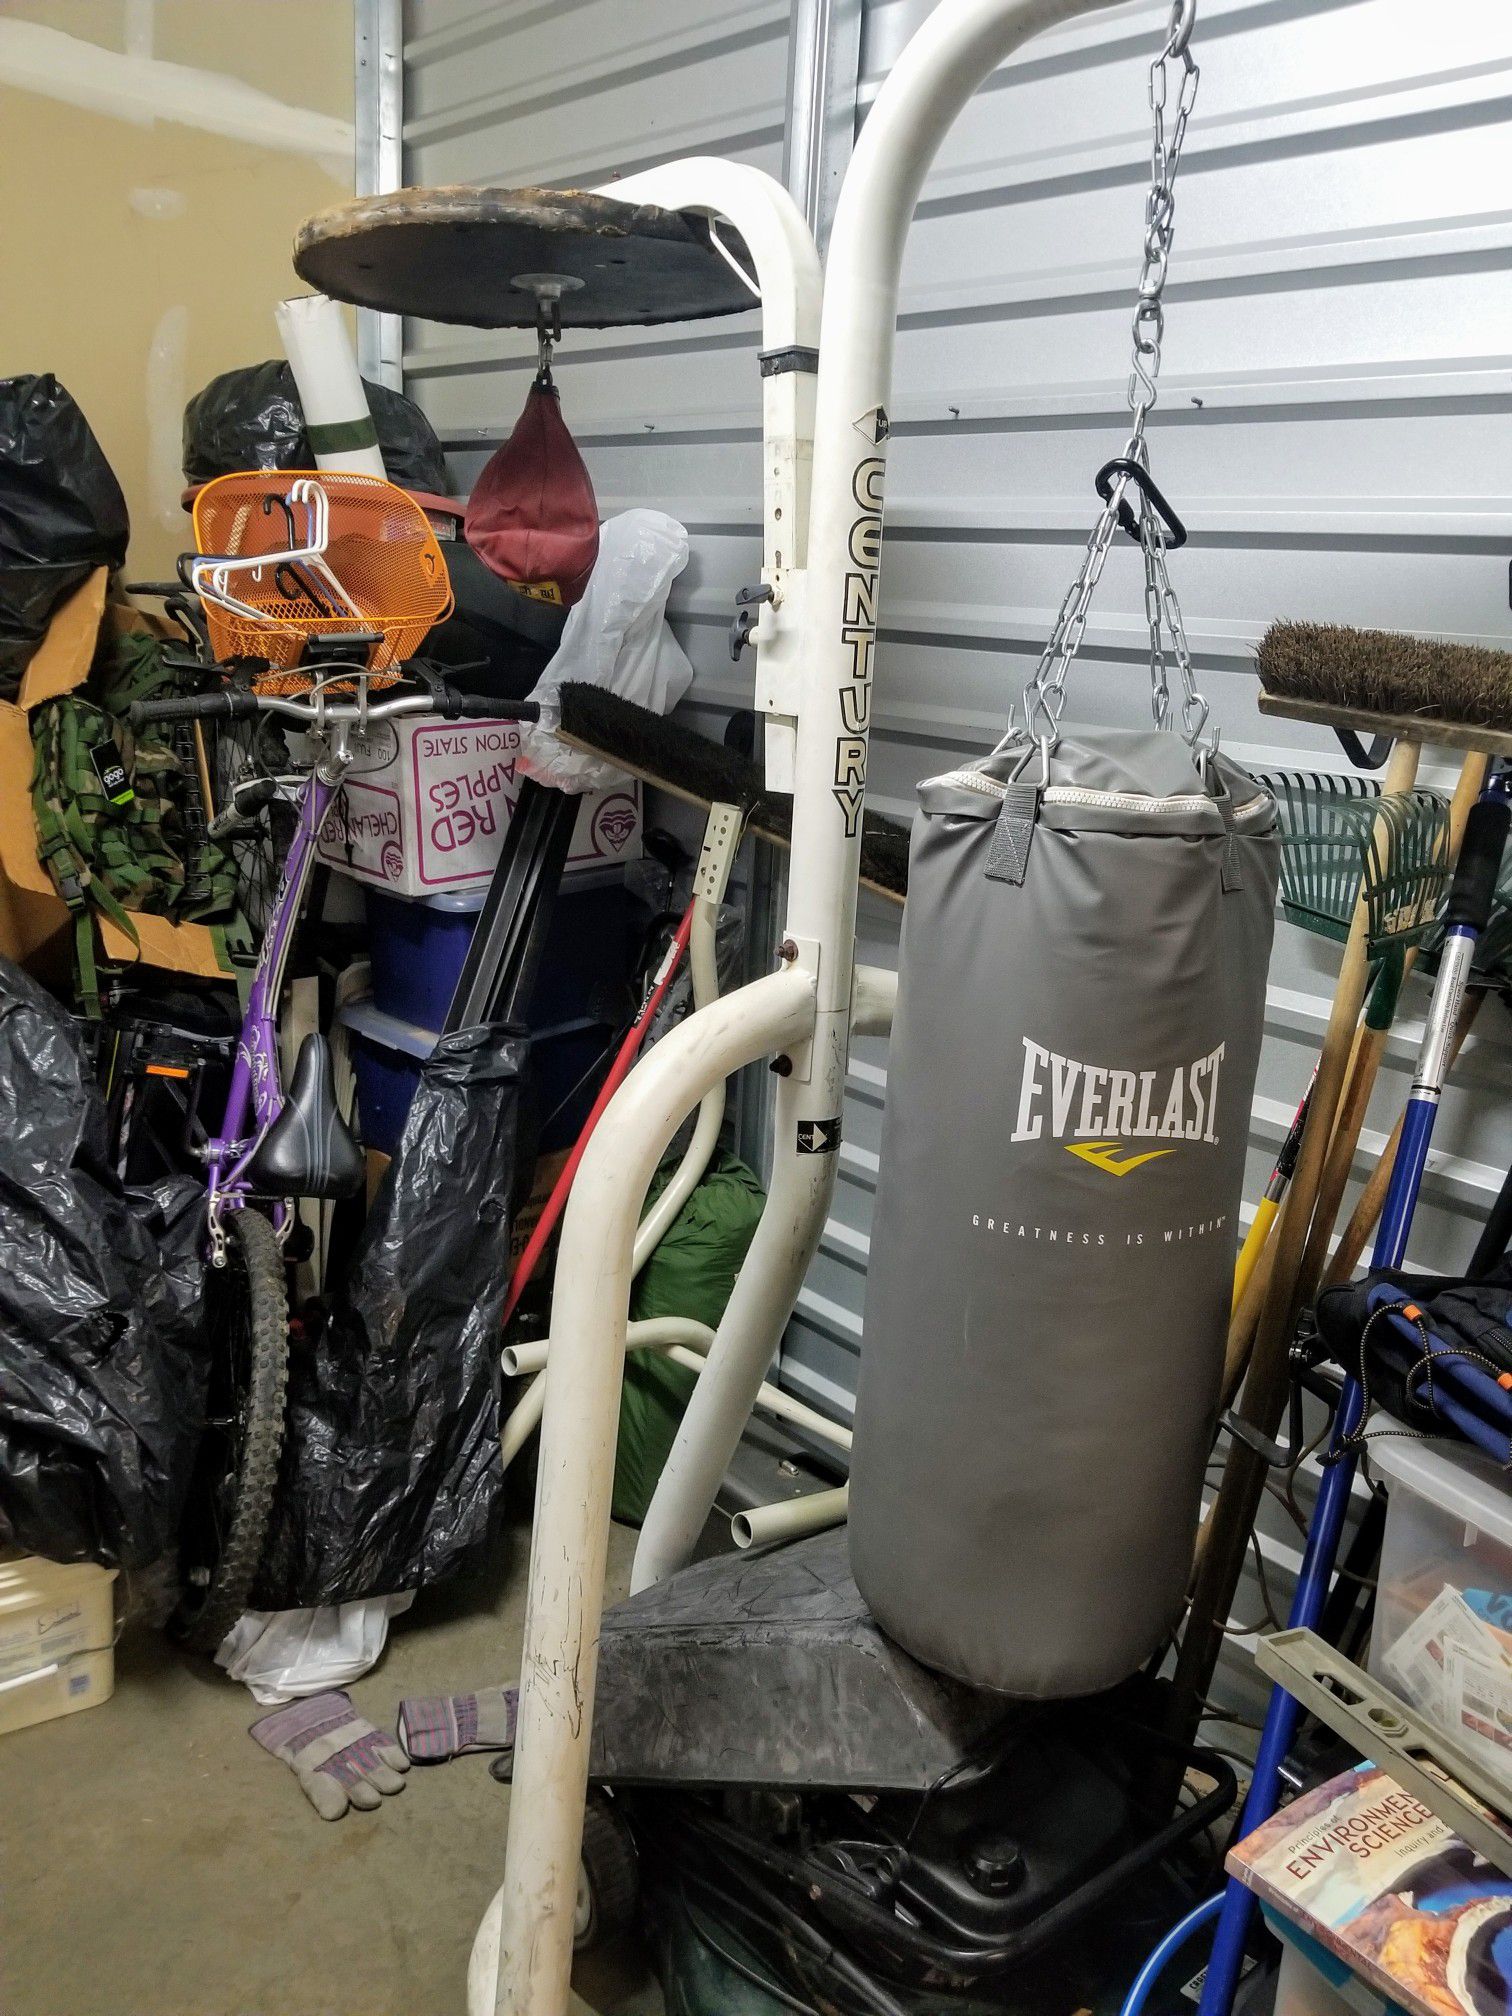 Complete NEW 60 lbs punching bag with (used) stand, (used) hand wraps, and NEW XL training gloves !